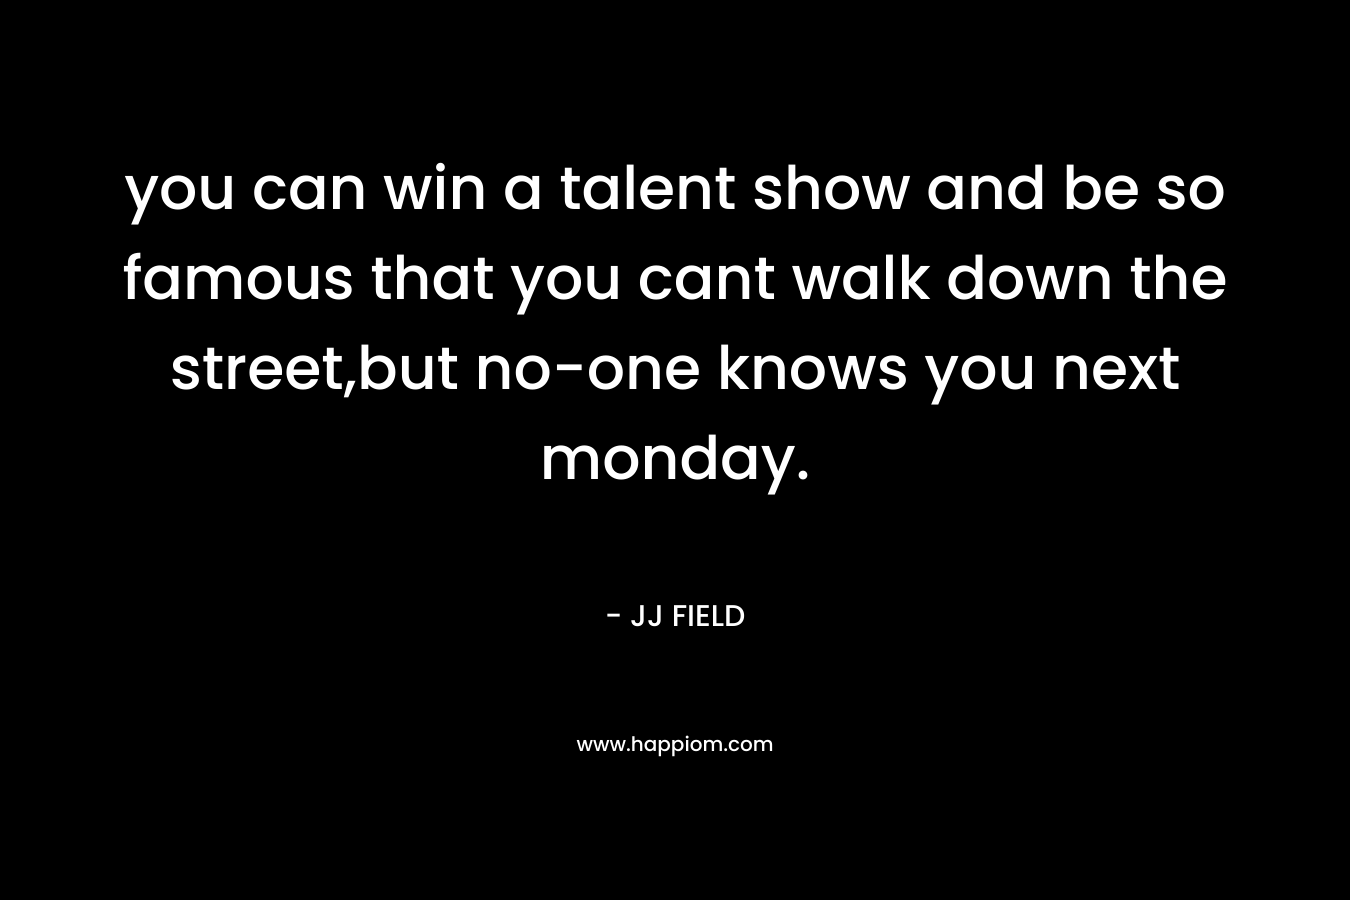 you can win a talent show and be so famous that you cant walk down the street,but no-one knows you next monday. – JJ FIELD